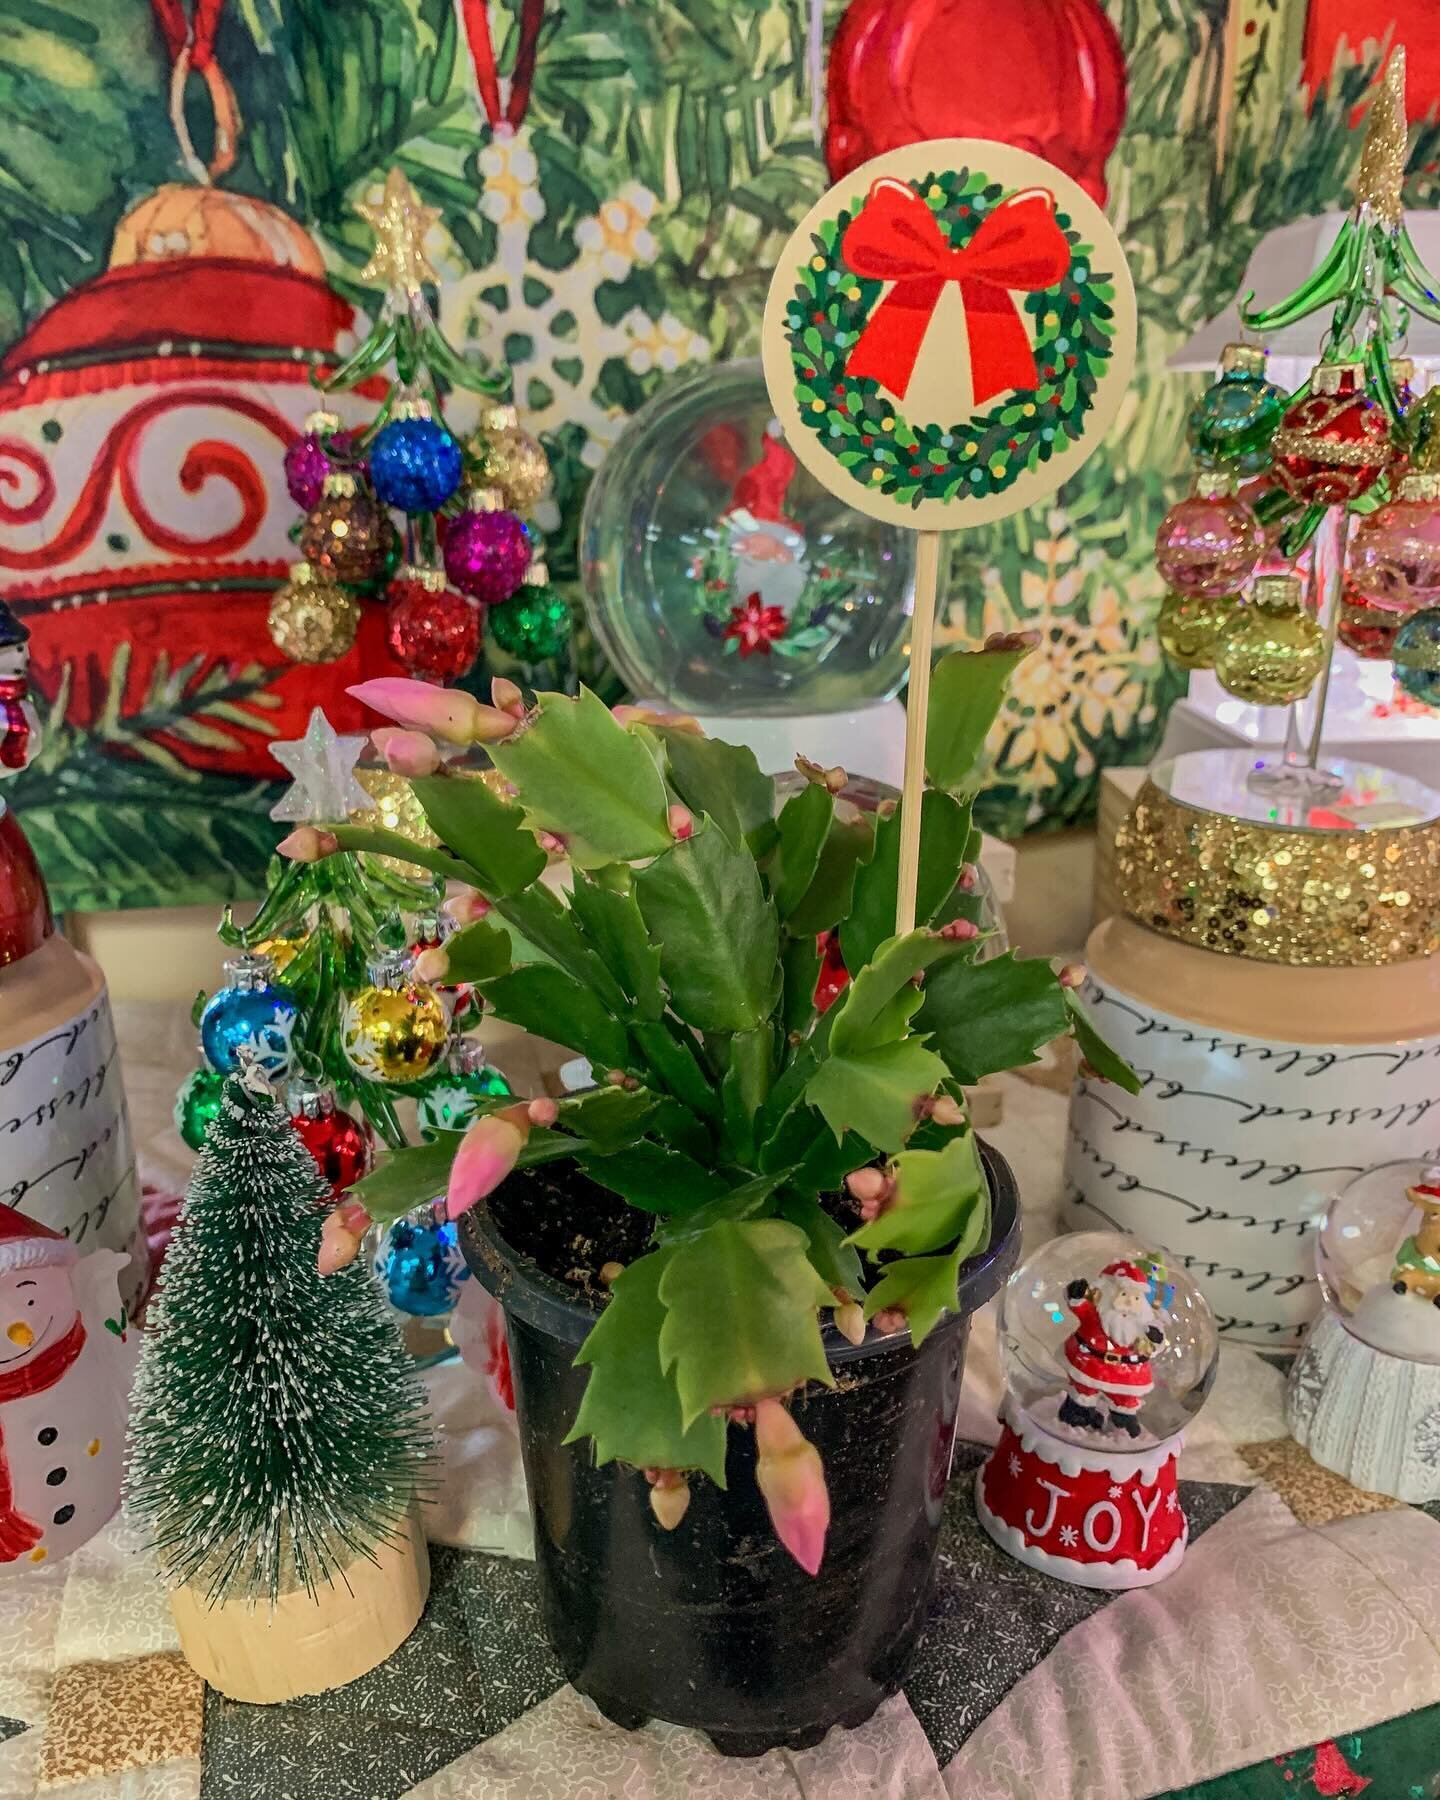 Christmas Cactus and Decorative Plant Stakes? Yes please! 🌵🎄